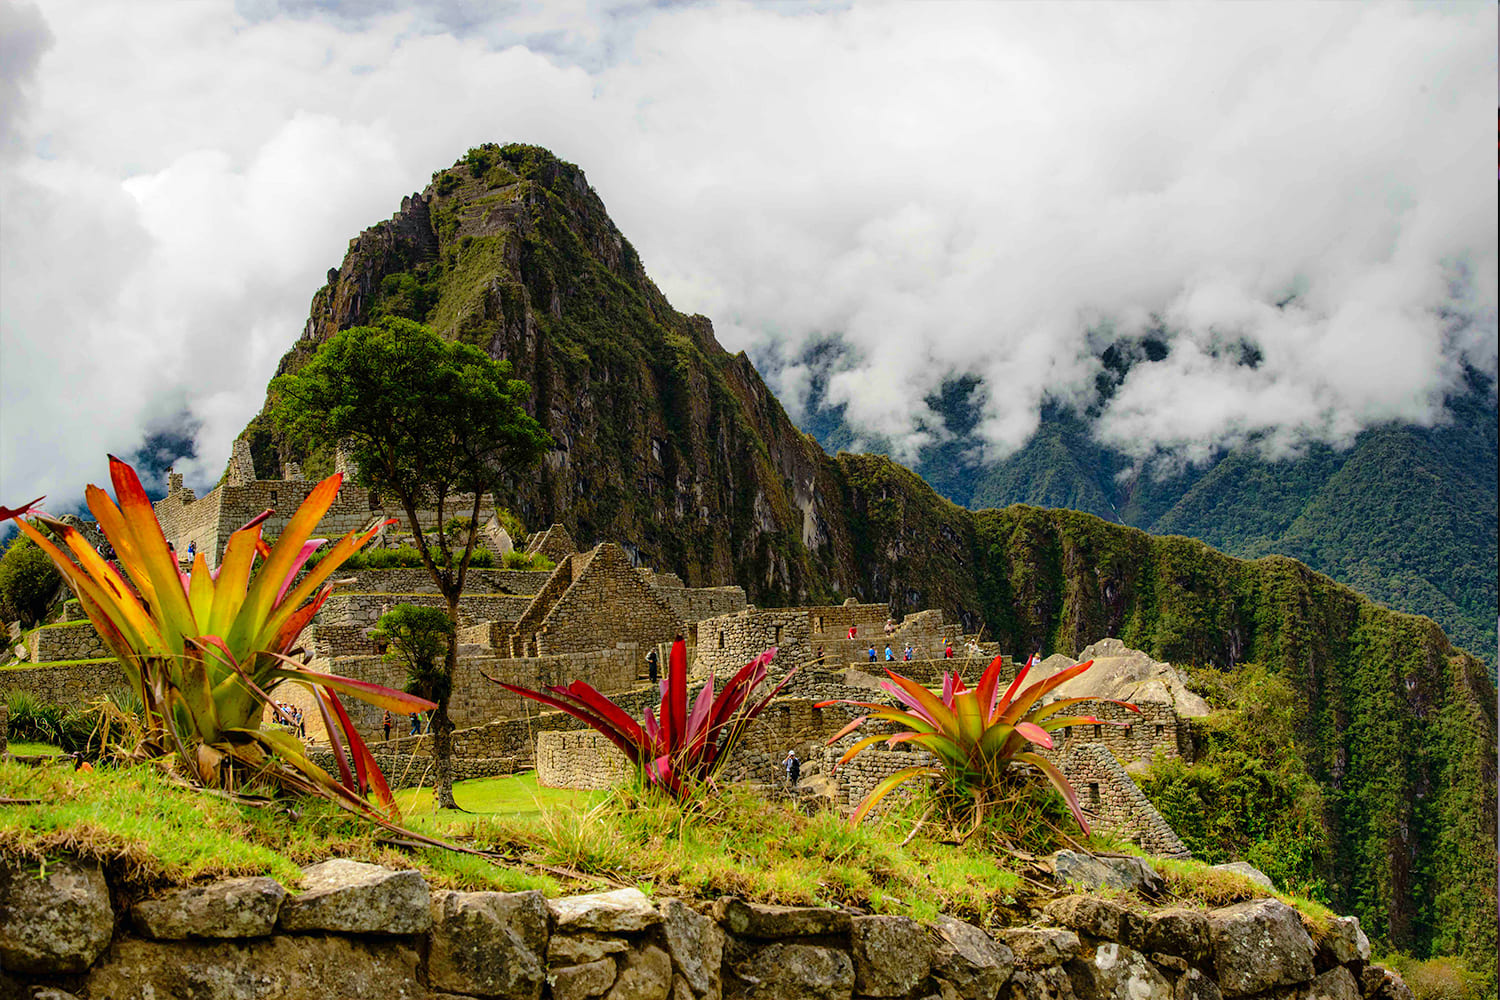 4.- EXPLORE THE MYSTERY SURROUNDING THE JEWEL OF THE INCAS